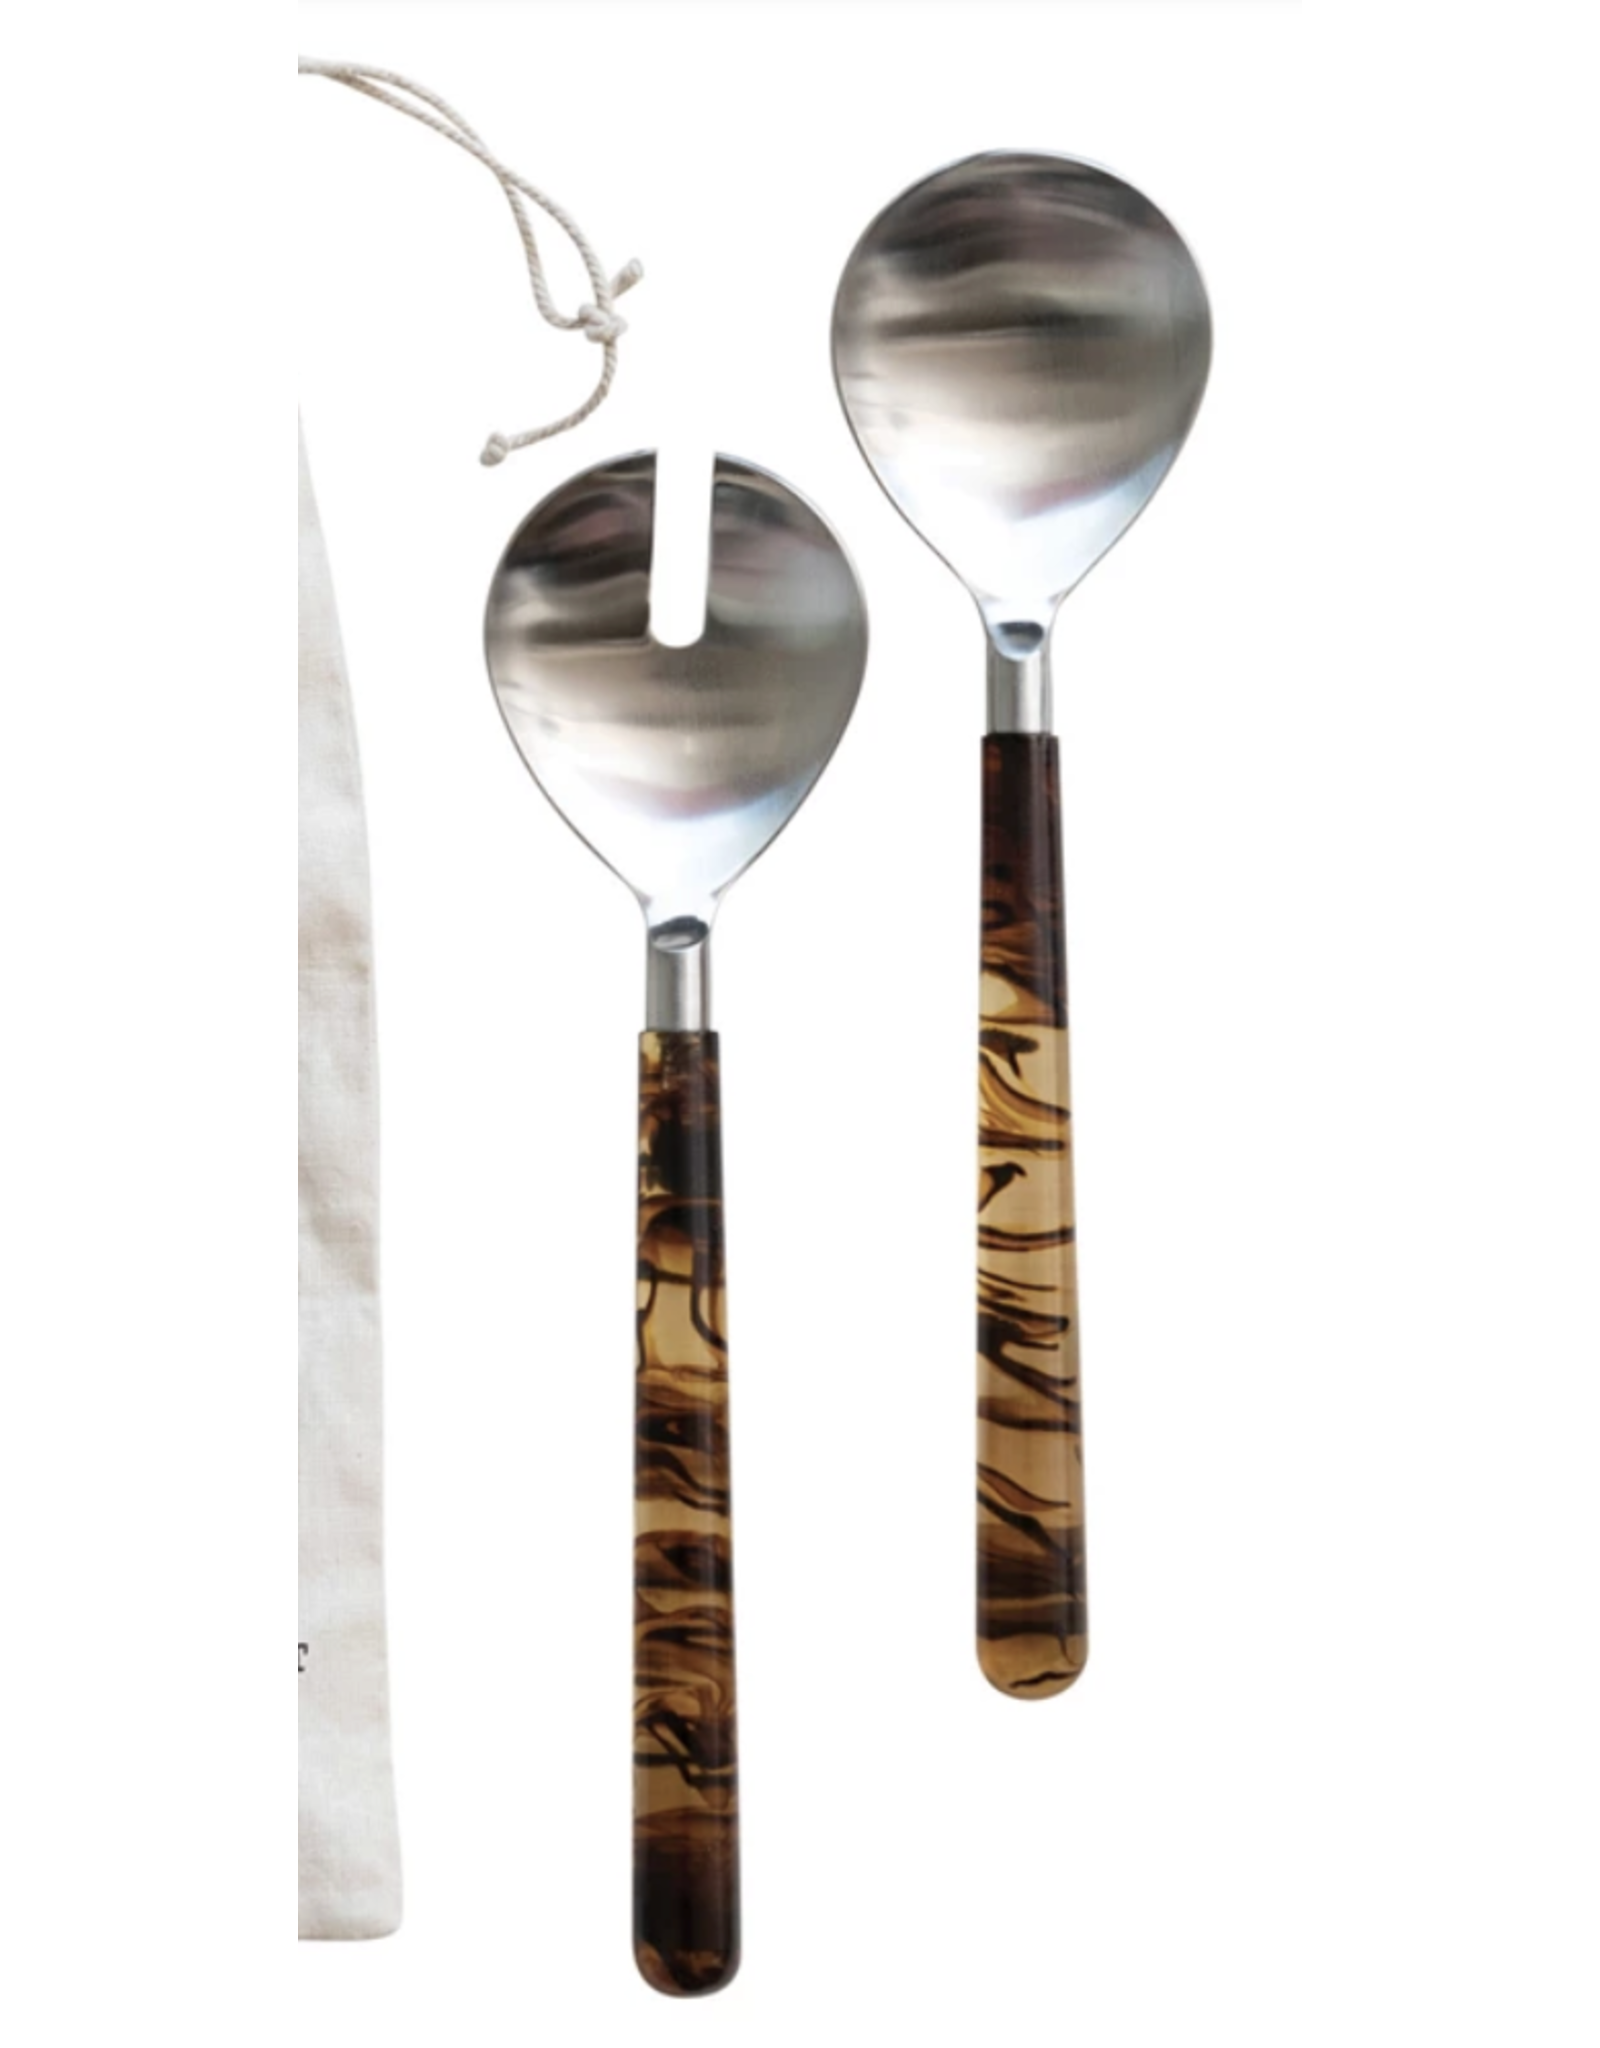 Creative Co-Op Stainless Steel Salad Servers, with Resin Finish, set of 2